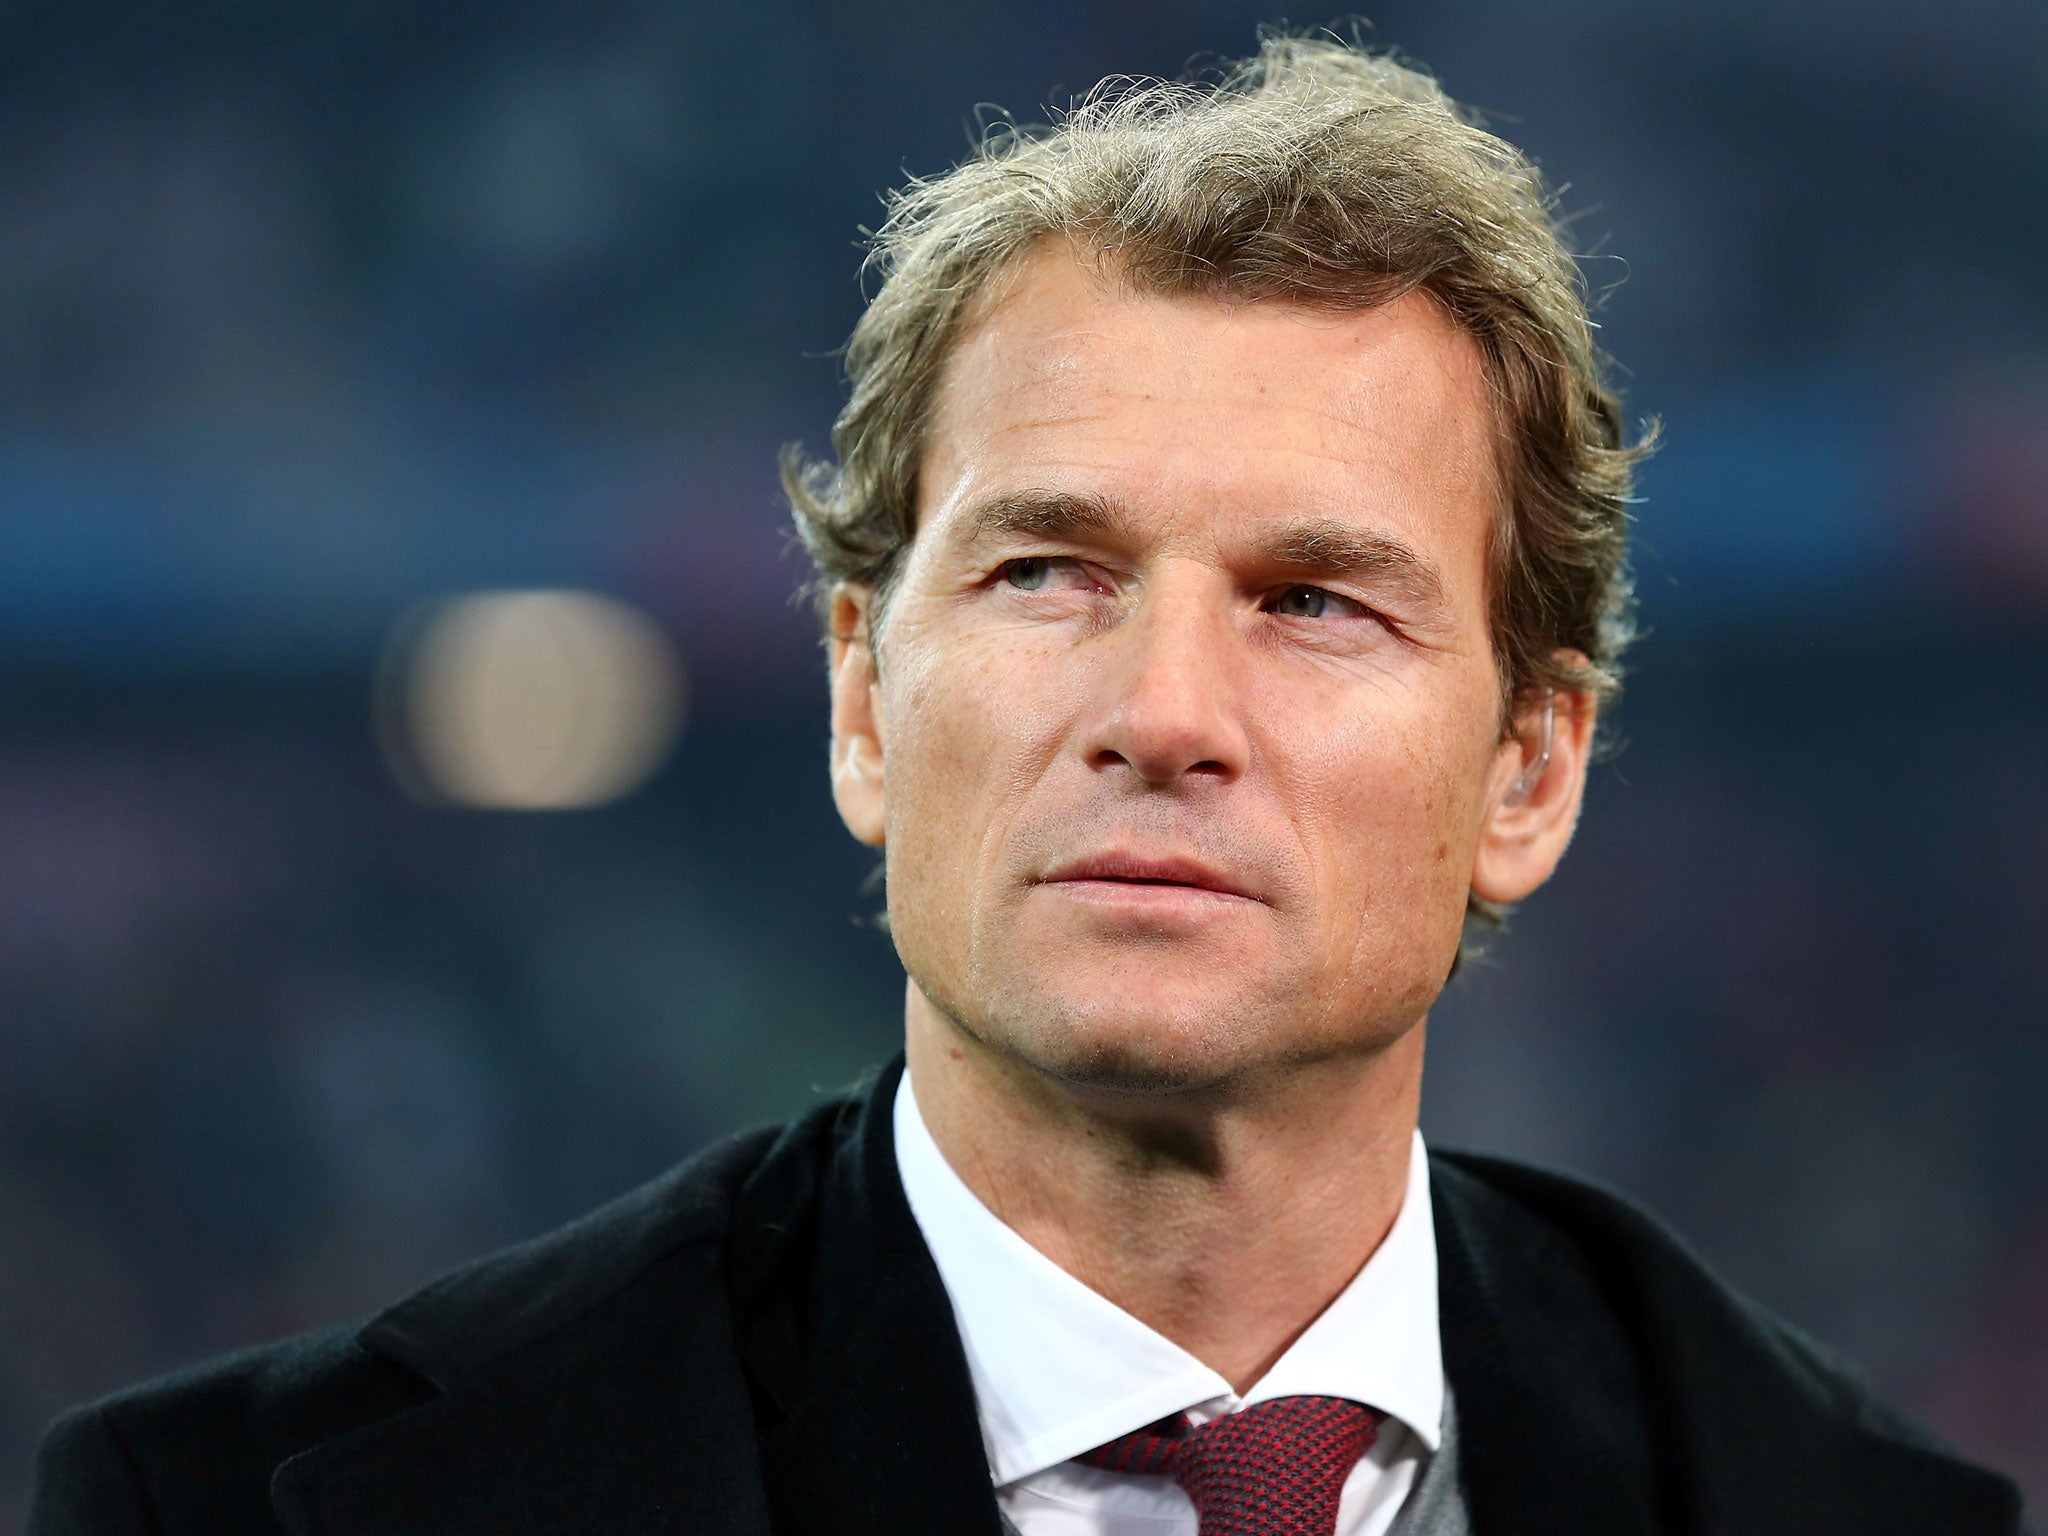 Arsenal &#39;Invincible&#39; Jens Lehmann offers £2,000 reward for the return of the contents of a bag stolen from his car in London | News &amp; Comment | Sport | The ... - Jens-Lehmann